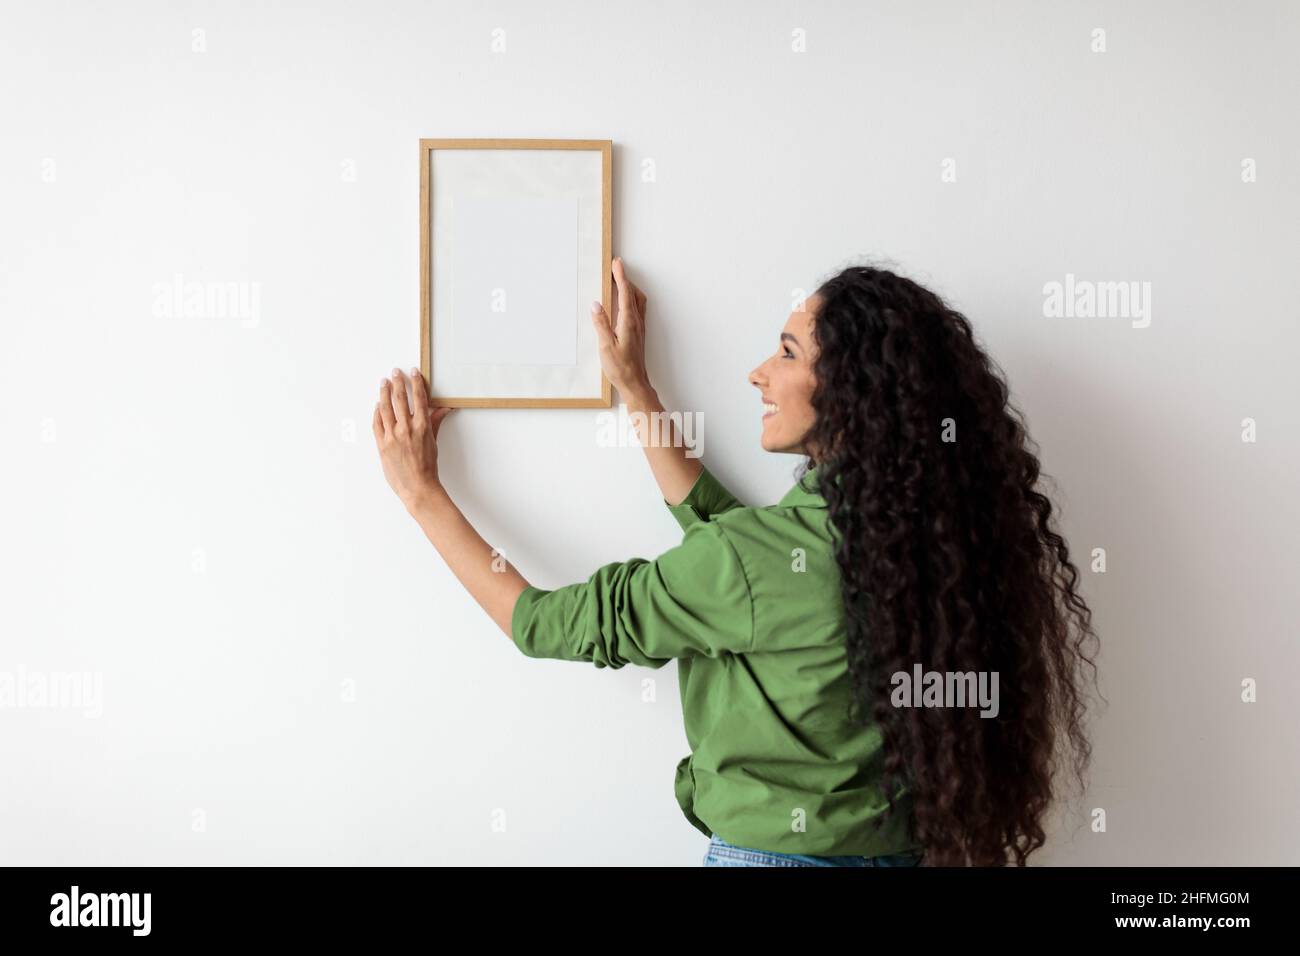 Lady Hanging Picture In Frame On Wall Decorating House Indoors Stock Photo